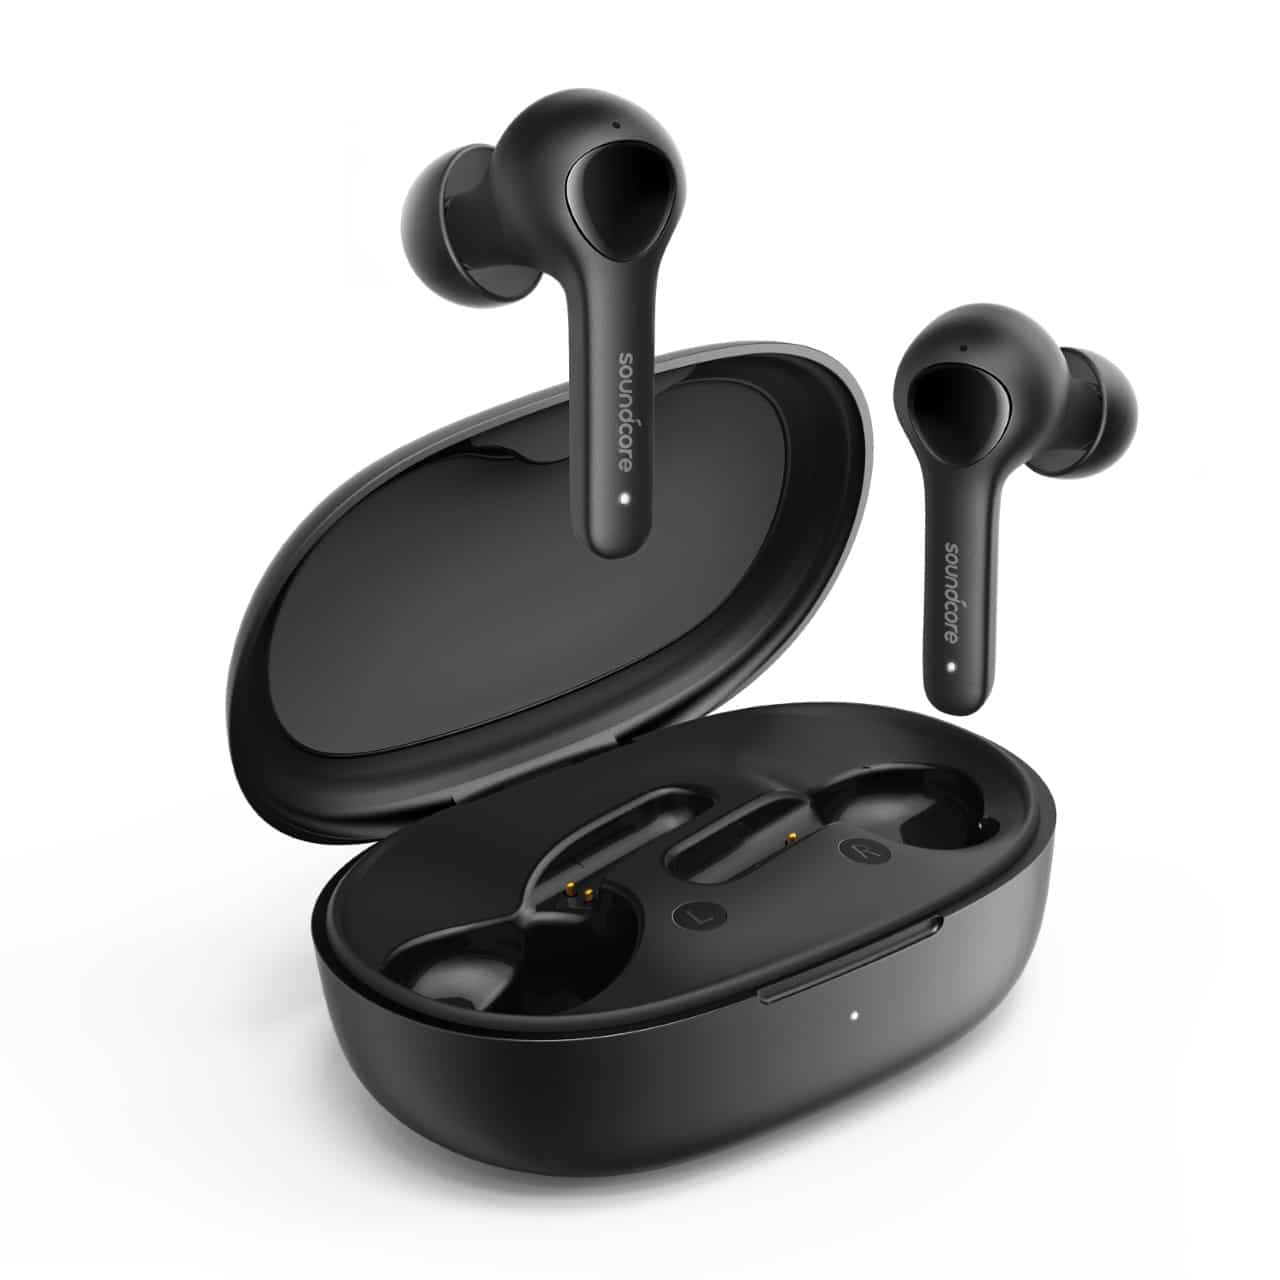 Soundcore Life Note True Wireless Earbuds - Rs 2,999 